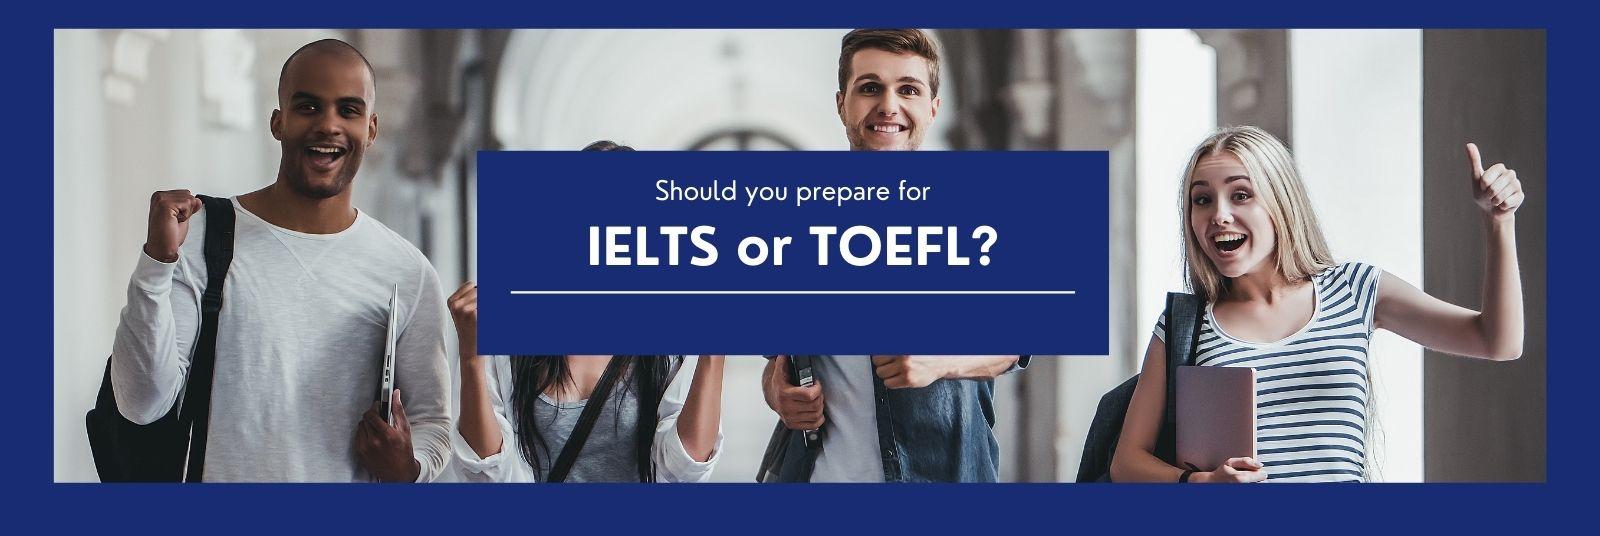 tpo toefl and toefl test which is harder